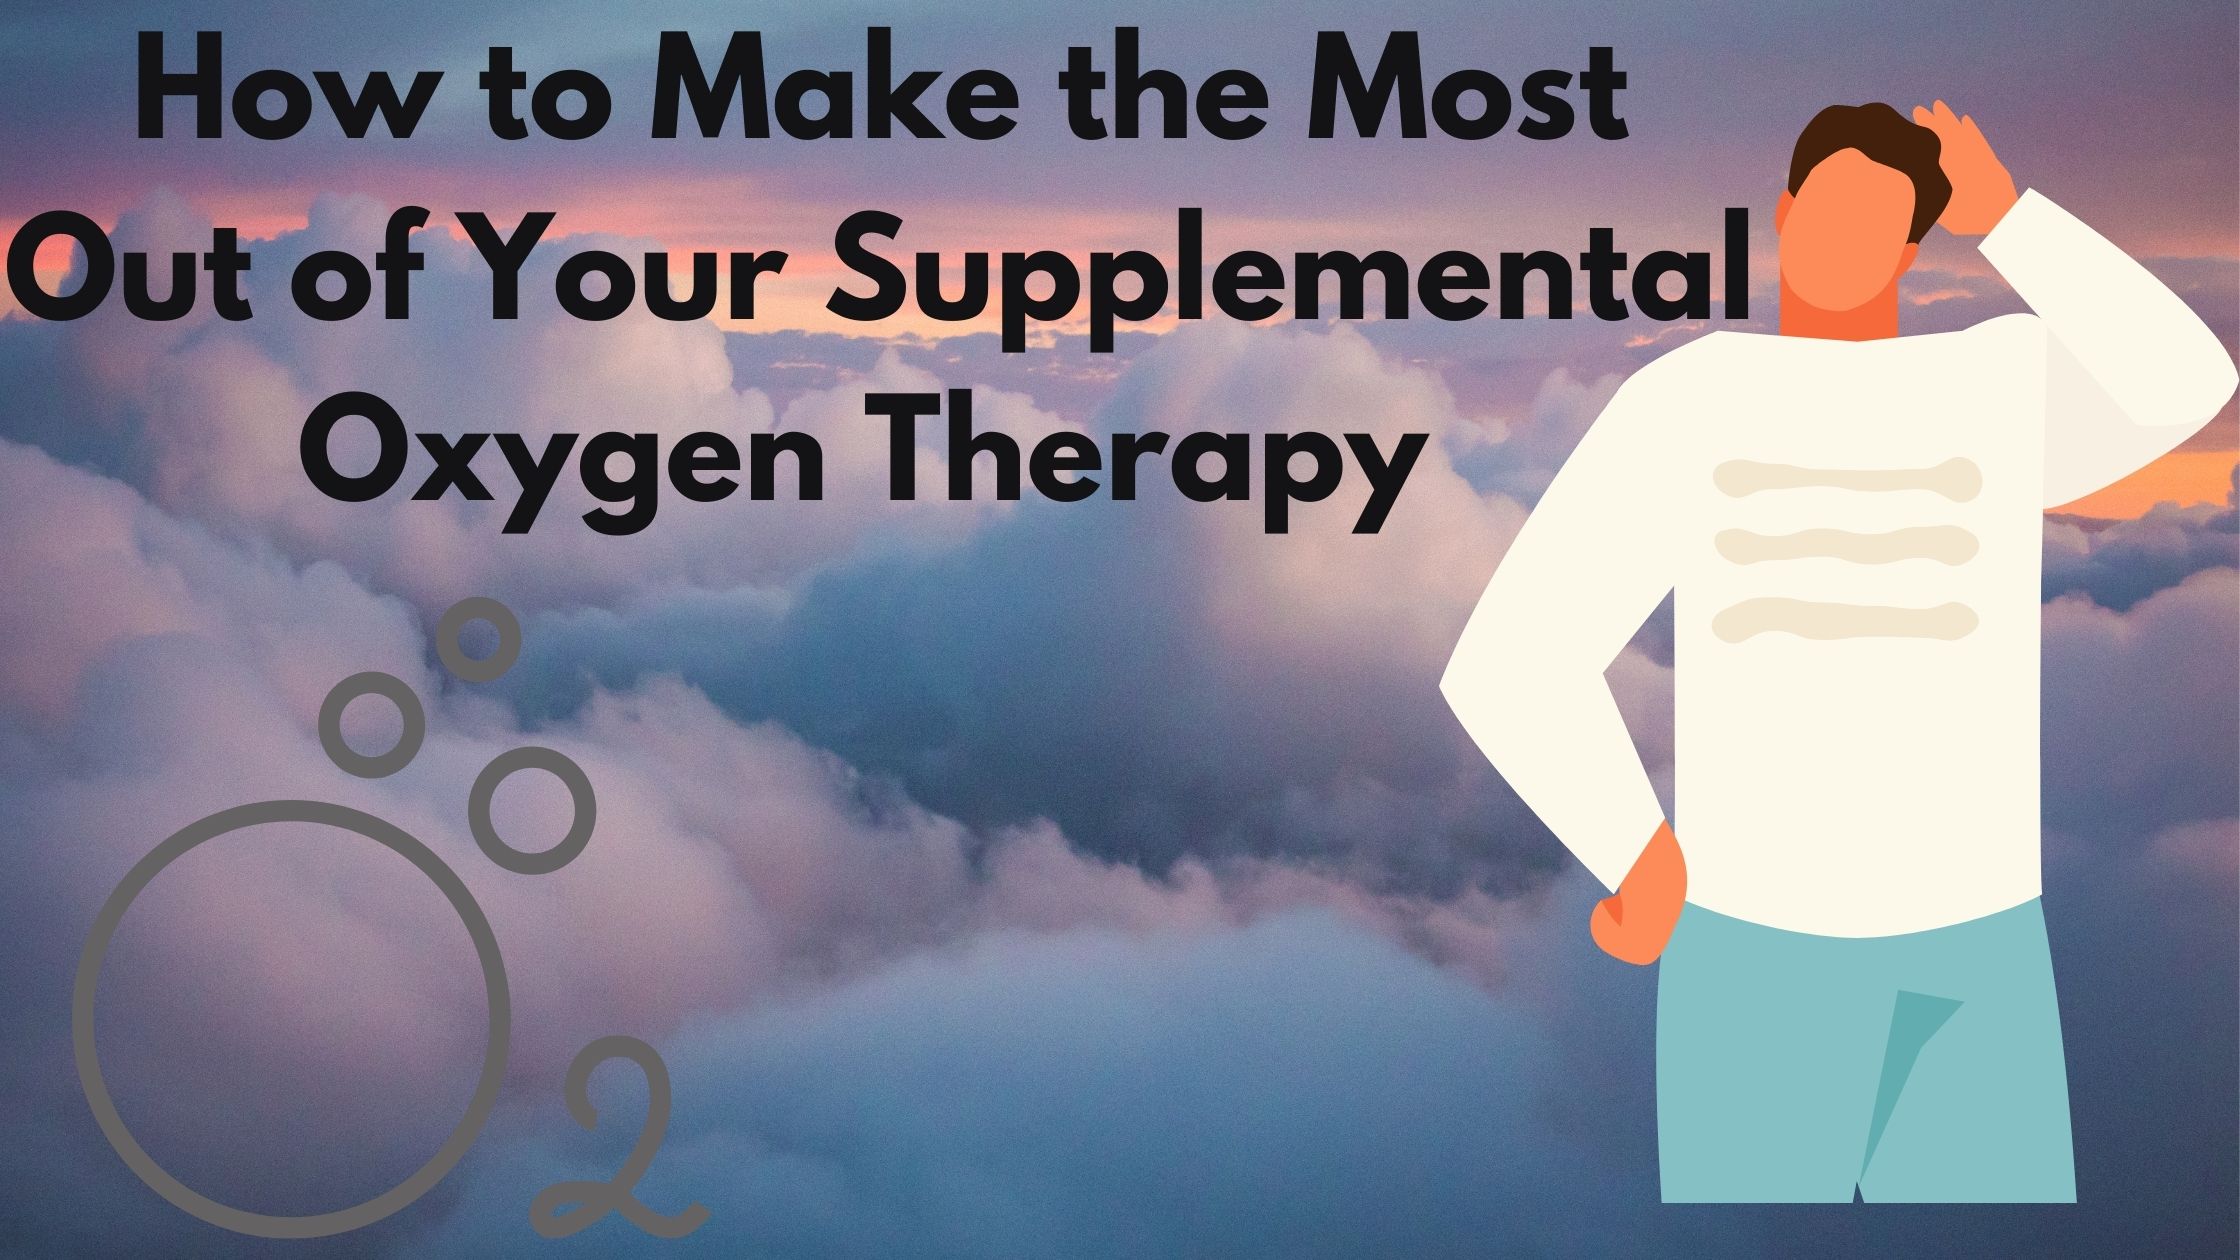 How to Make the Most Out of Your Supplemental Oxygen Therapy